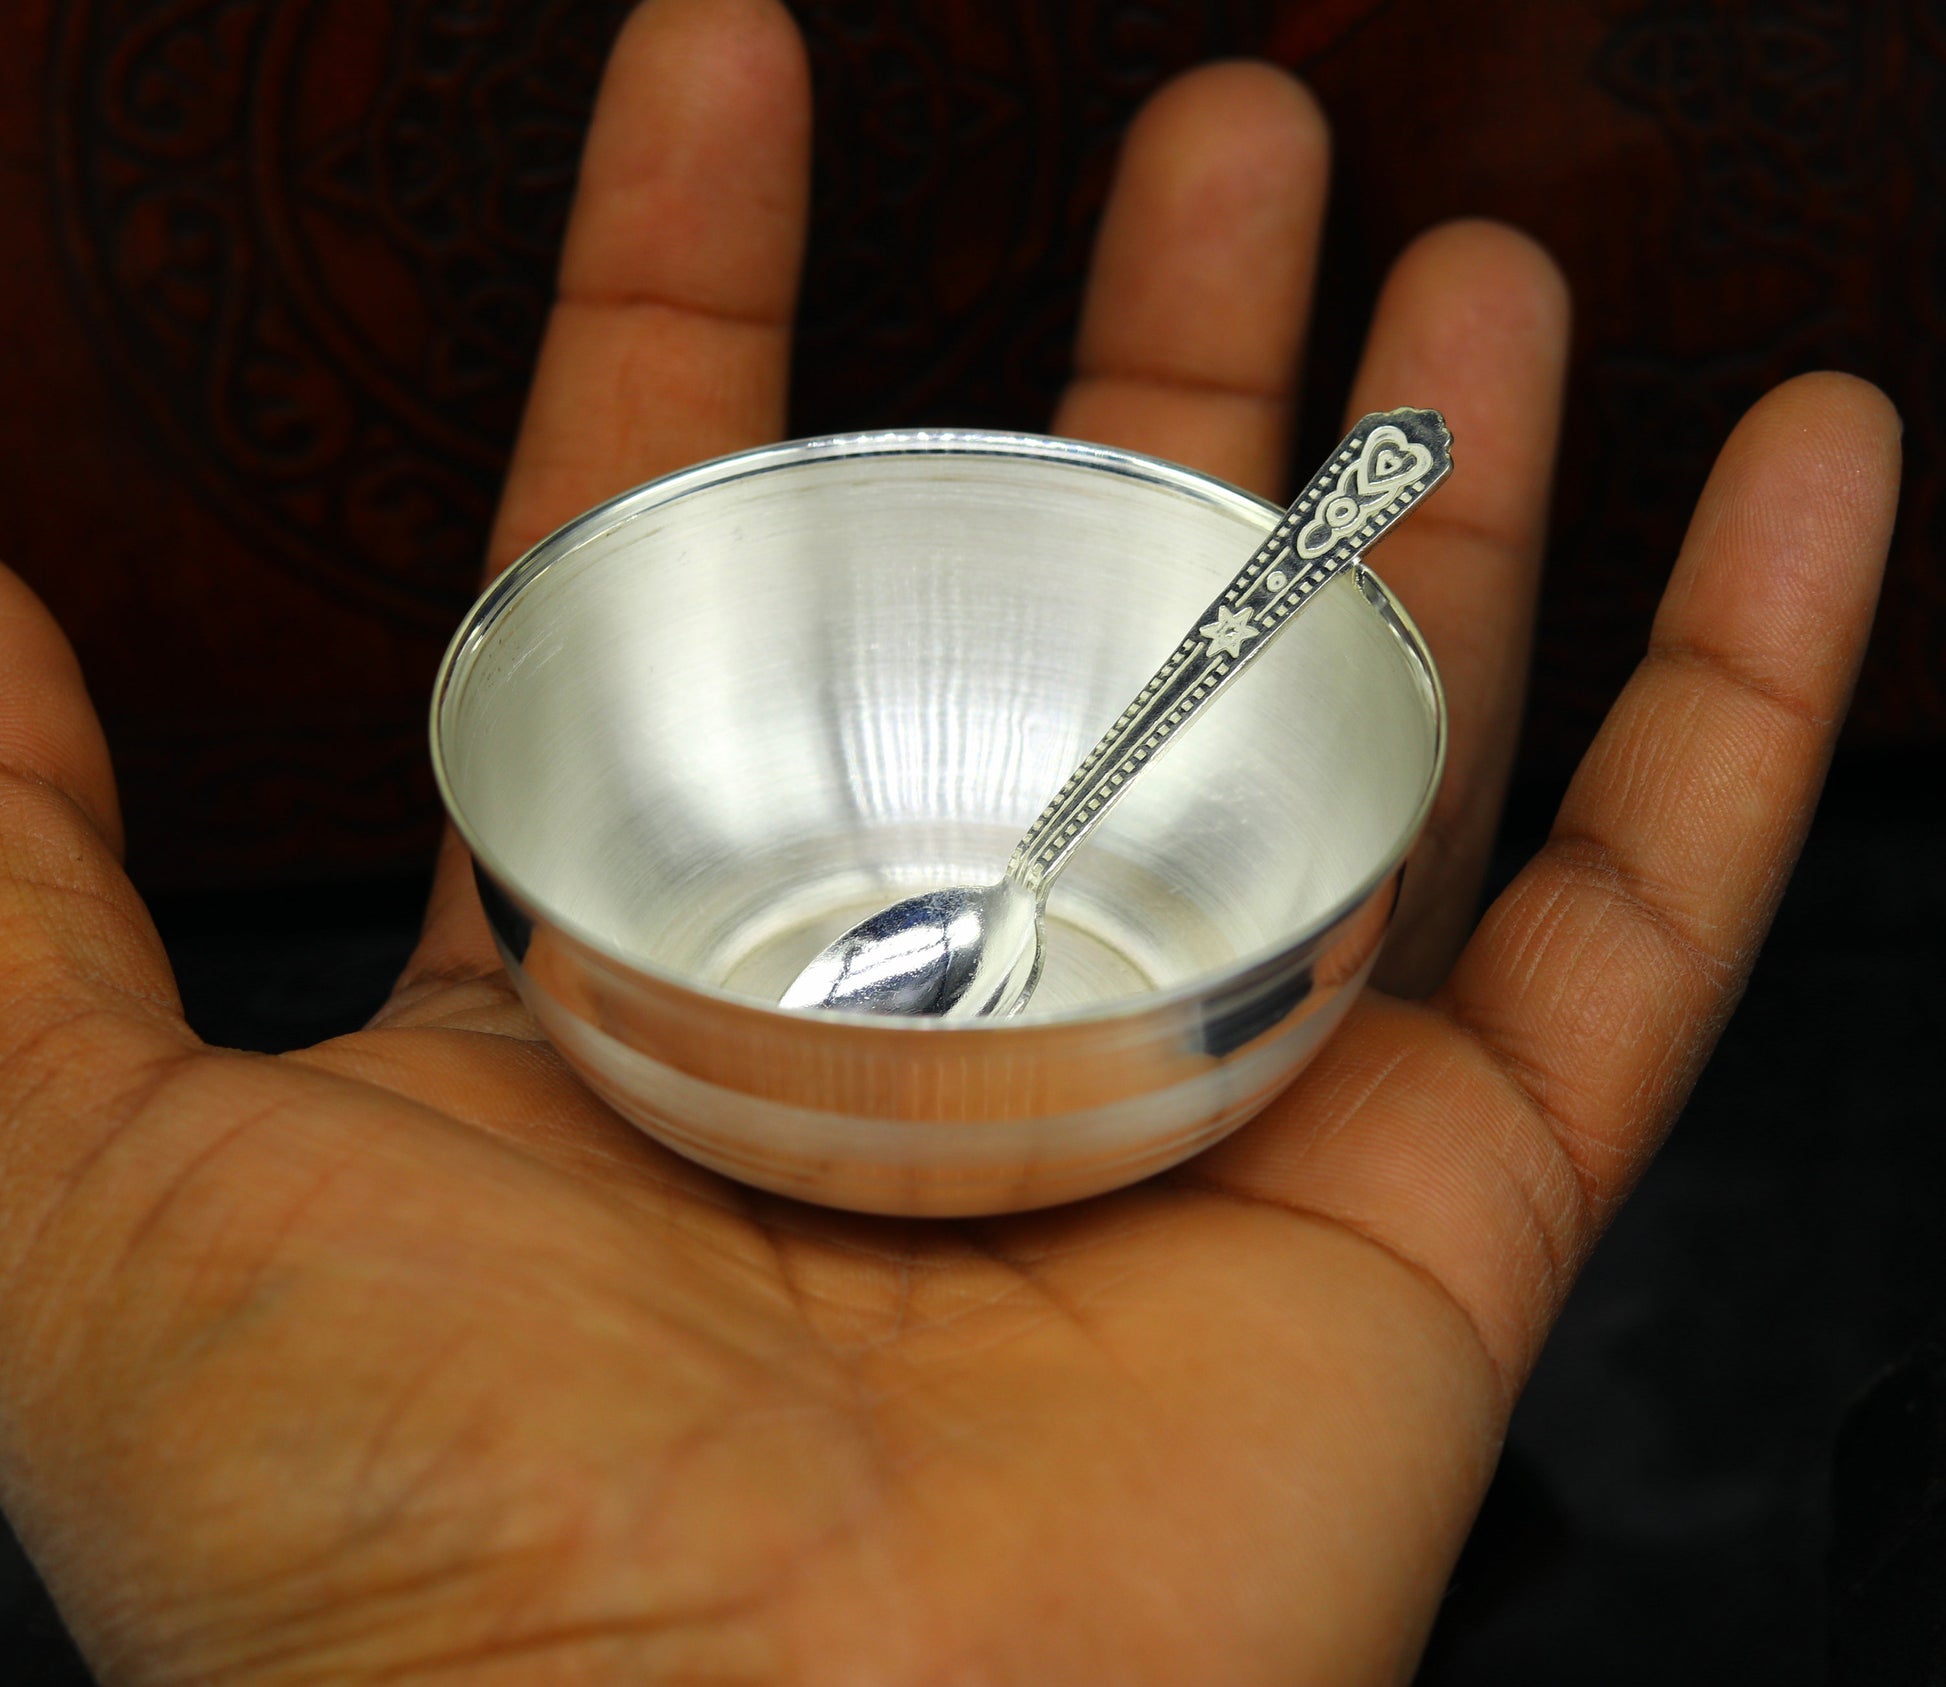 999 pure sterling silver handmade solid silver bowl and spoon, healthy serving bowl, silver vessels, baby serving utensils baby set sv82 - TRIBAL ORNAMENTS